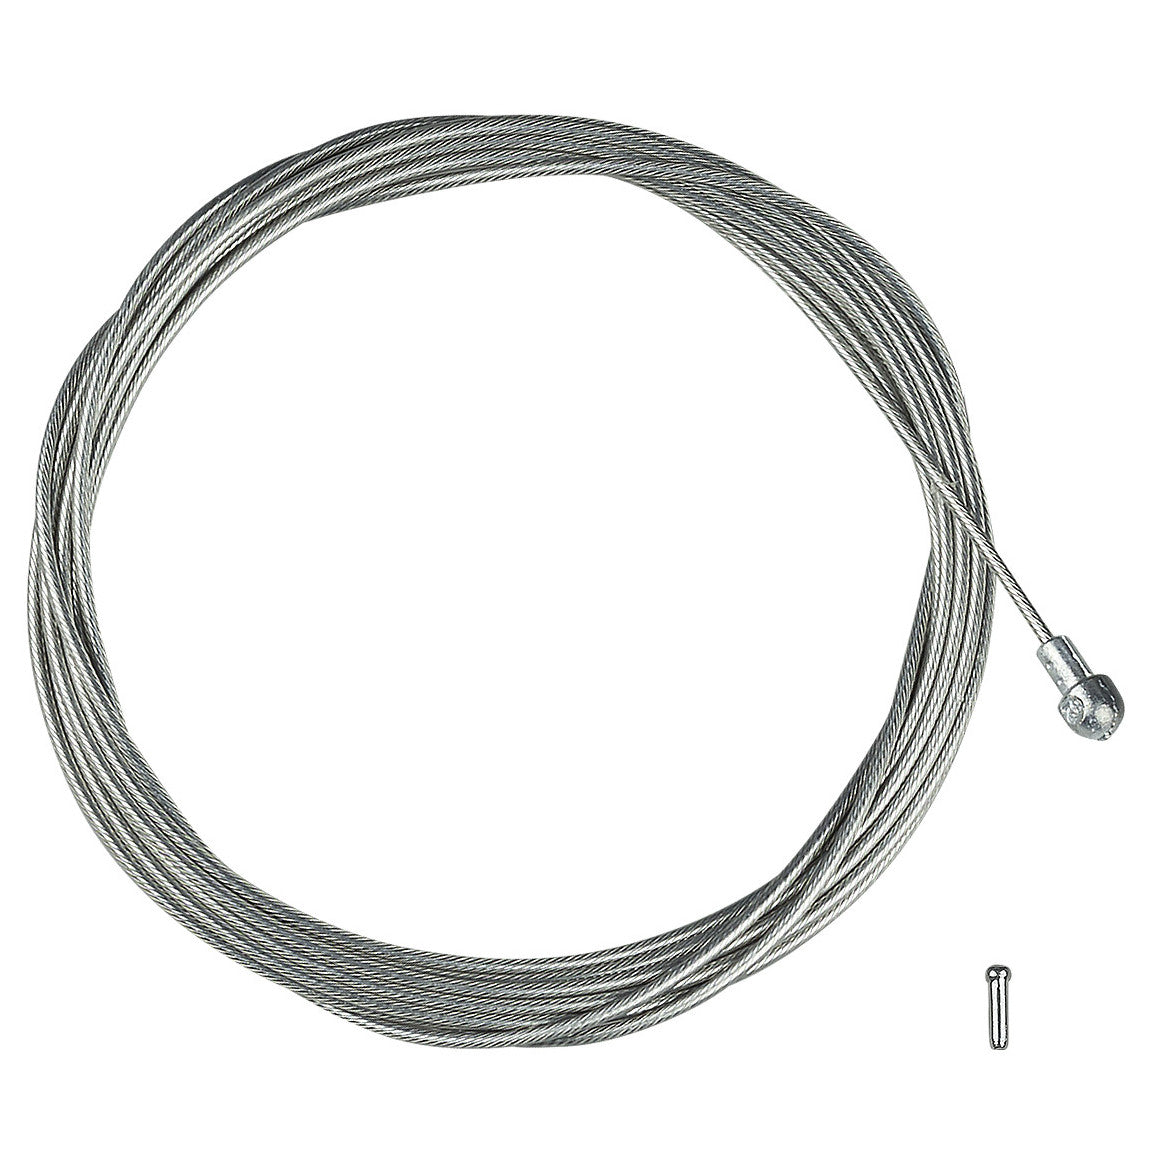 Pro Road Brake Cable